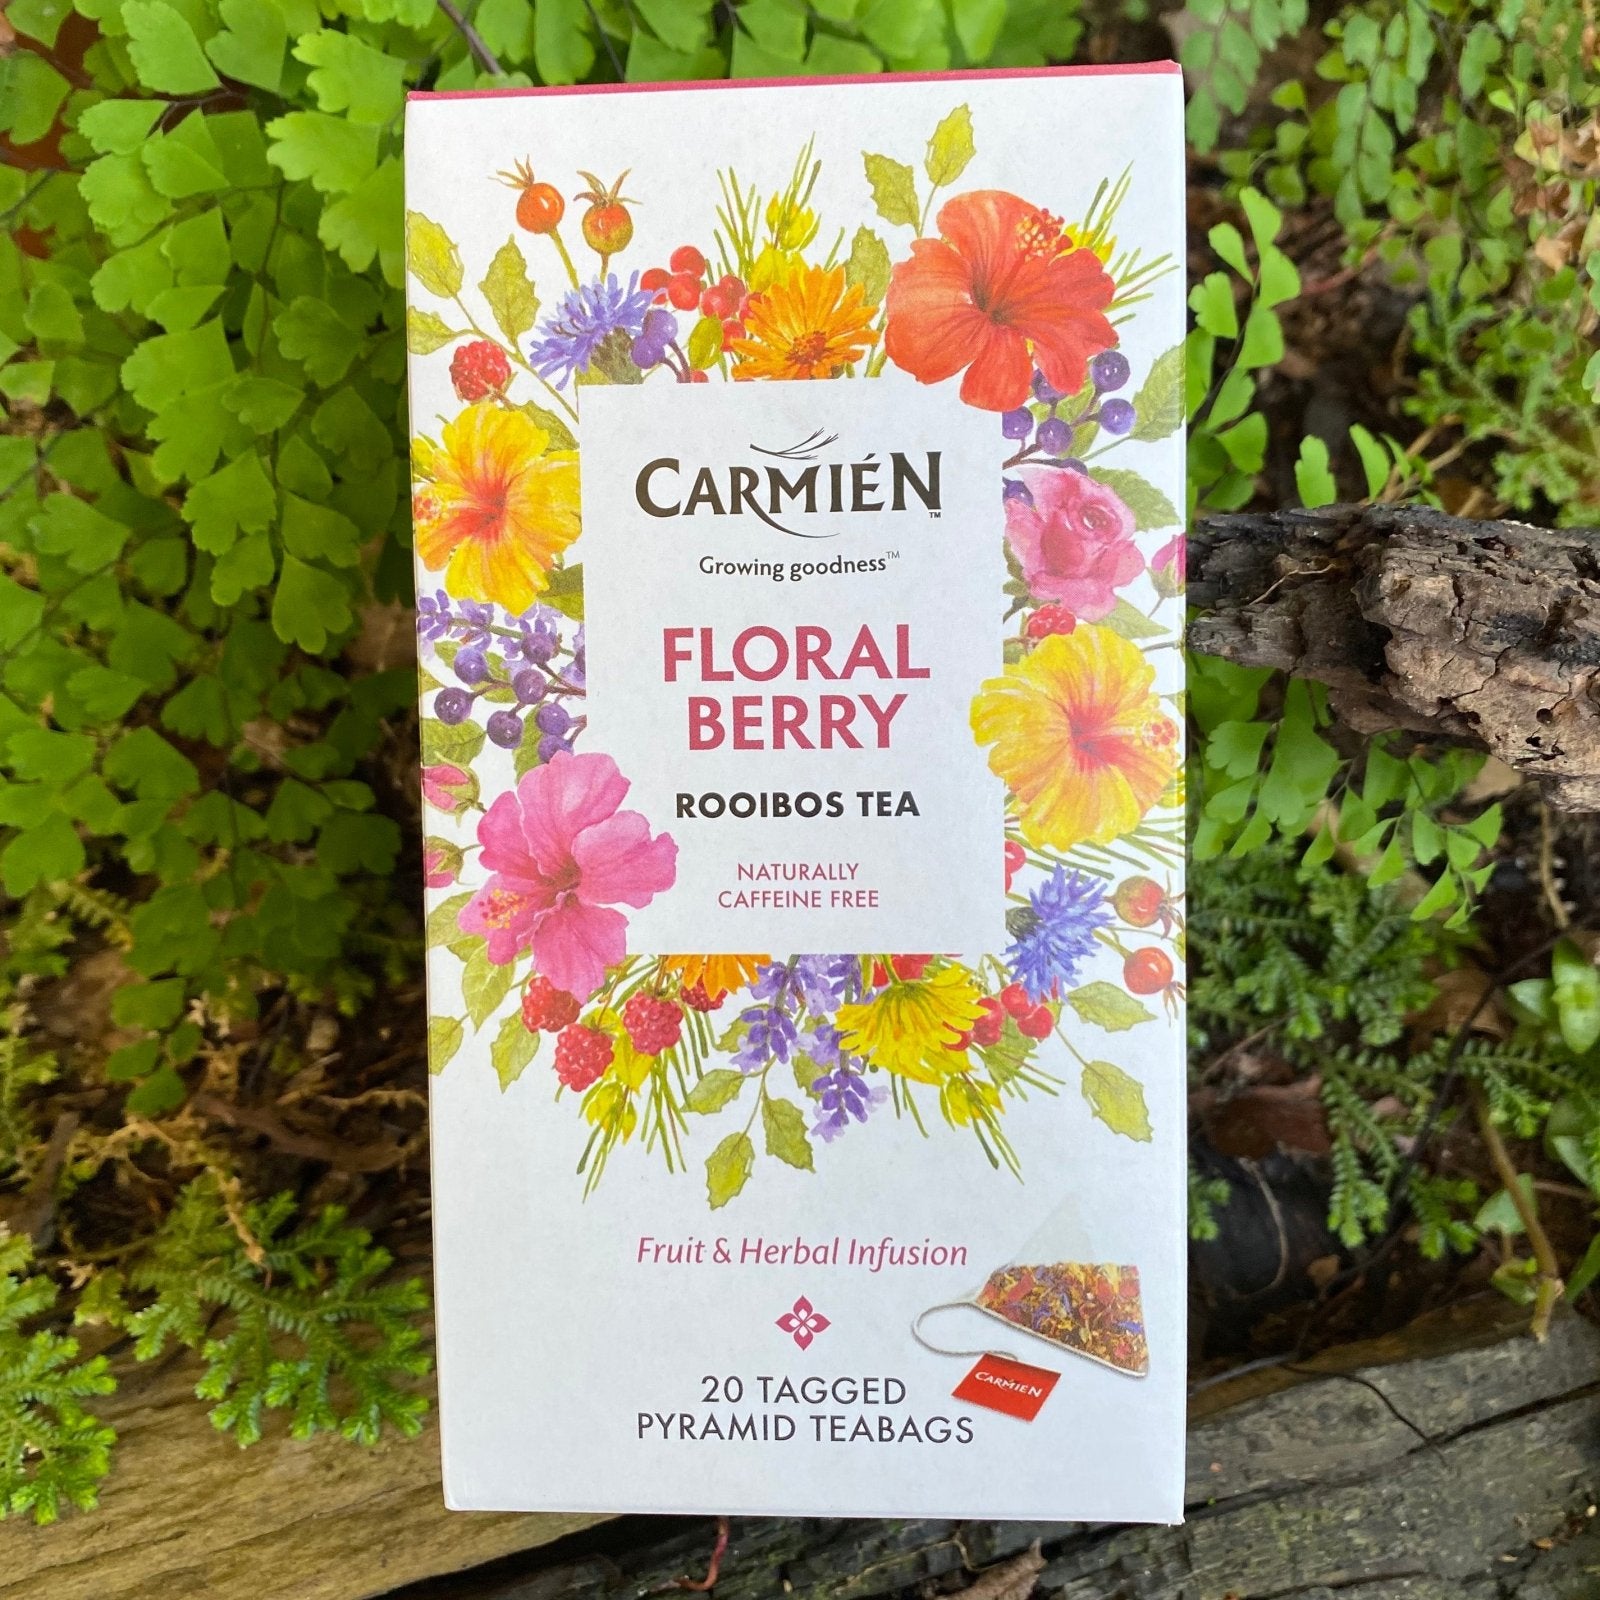 Carmien Floral Berry Rooibos Tea (20 tagged pyramid teabags) - The Deli